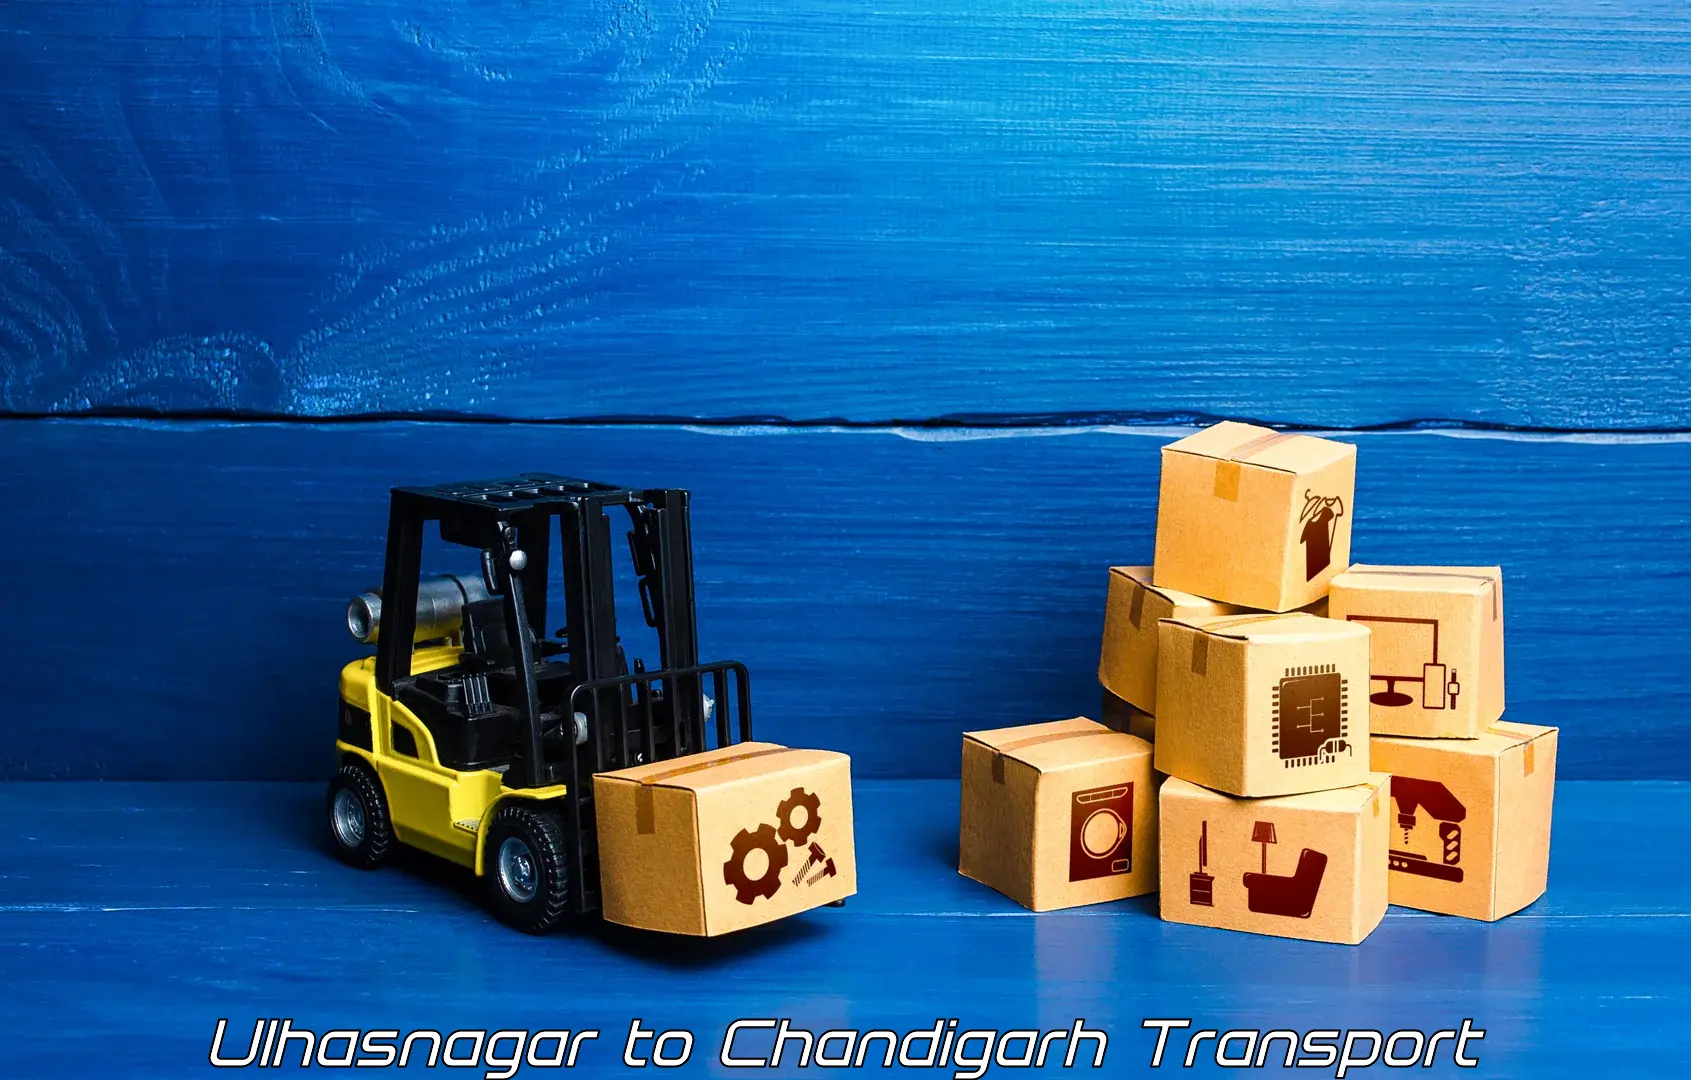 All India transport service Ulhasnagar to Chandigarh